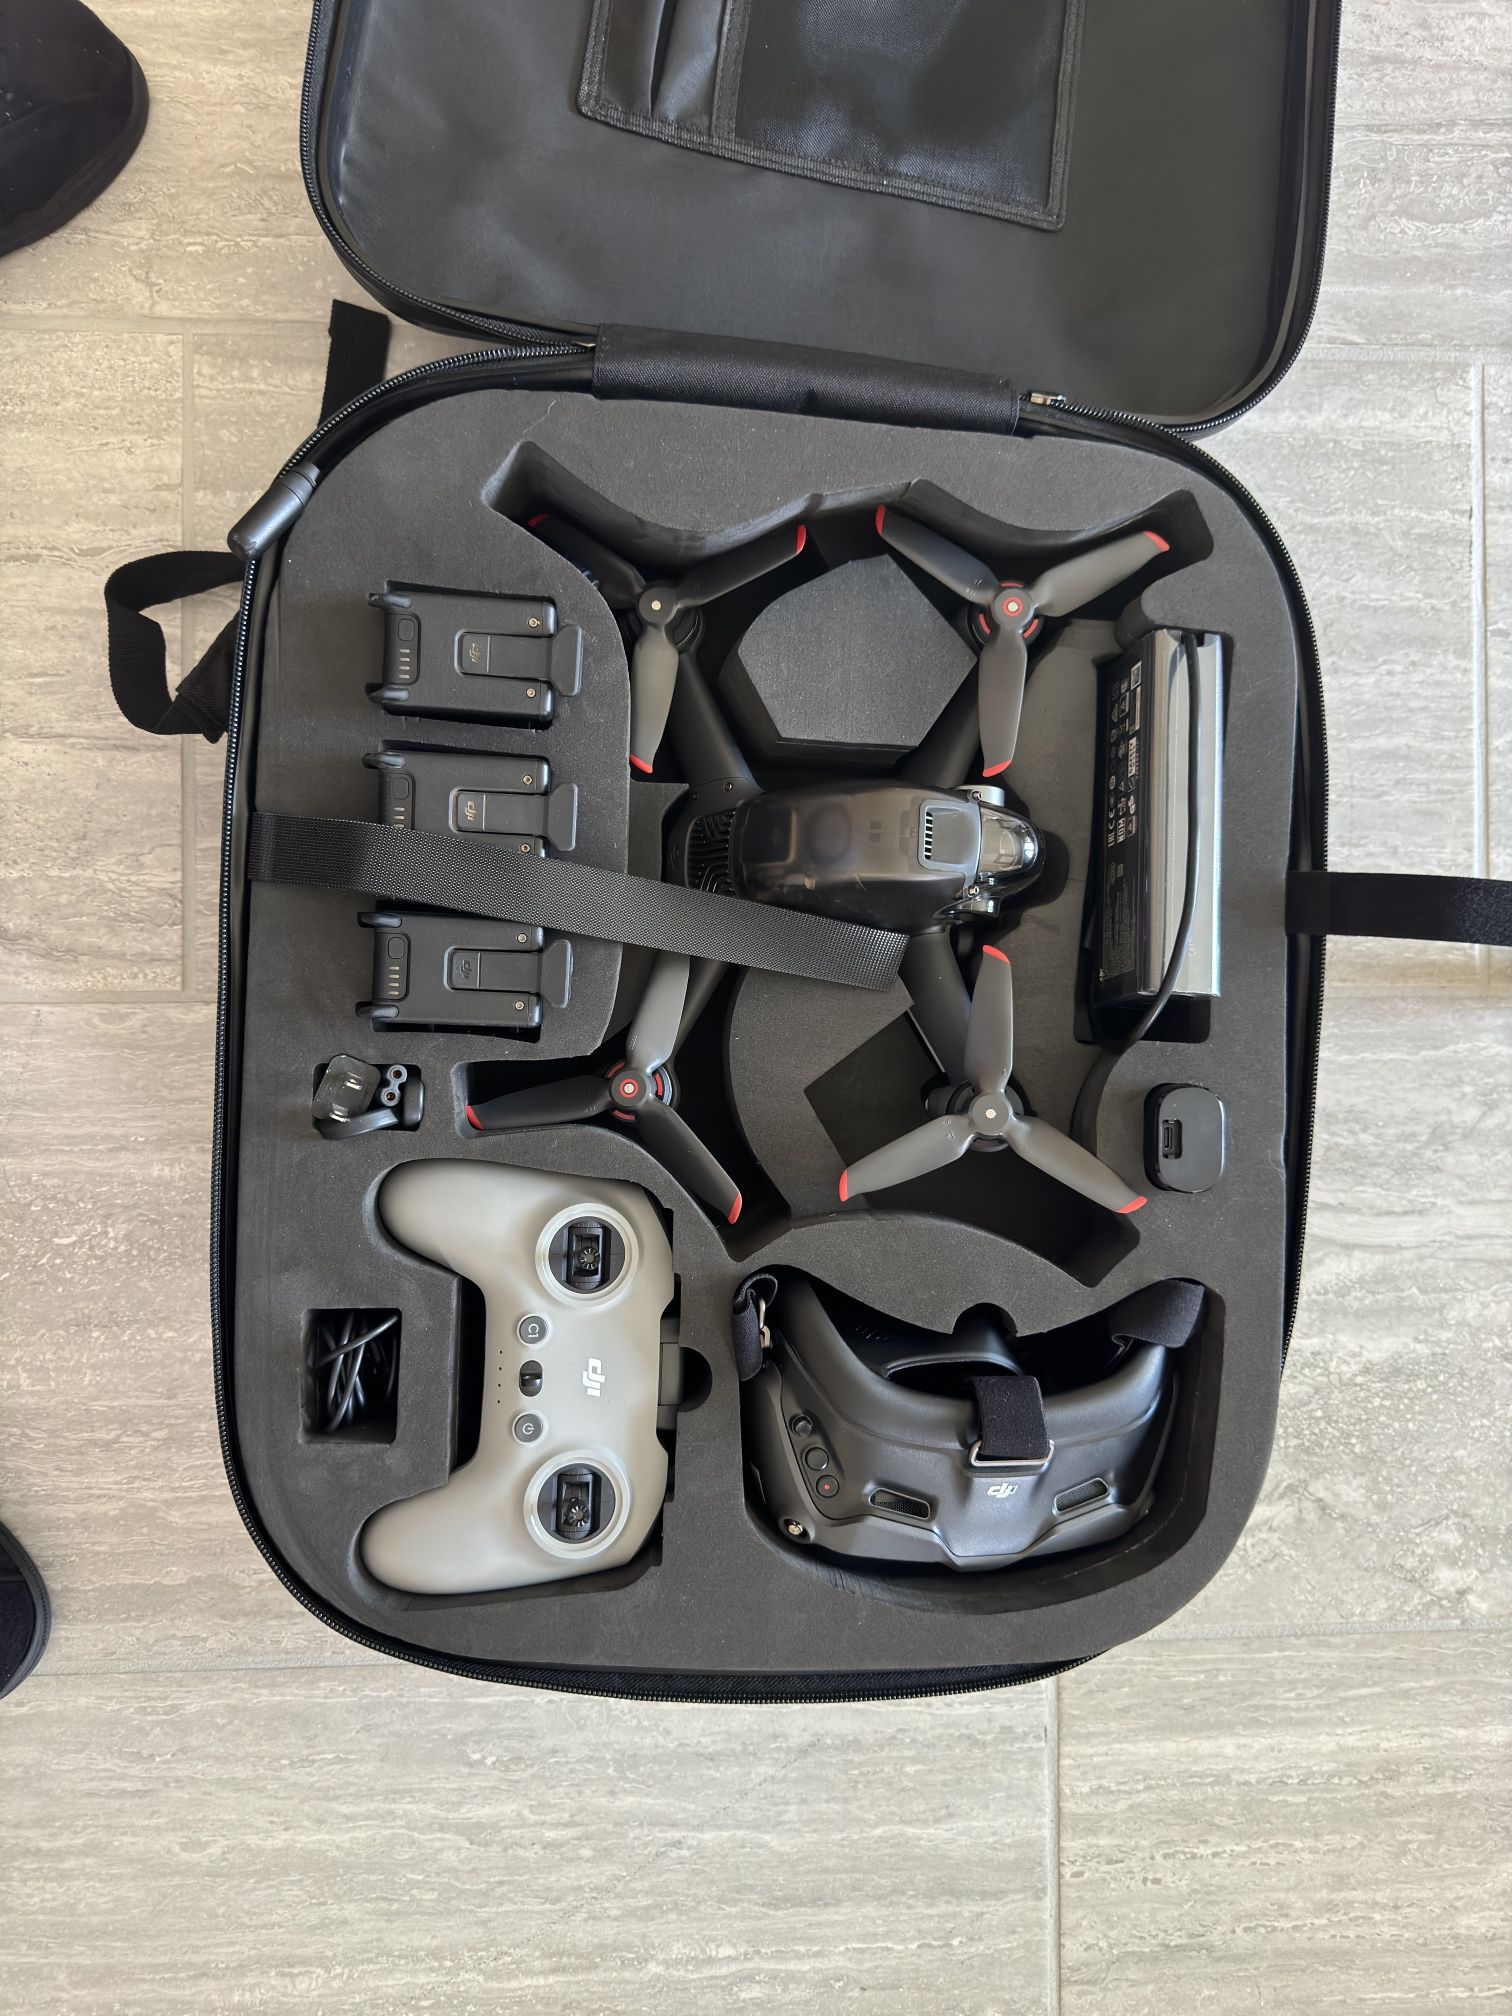 Dji FPV Drone With Two Cases